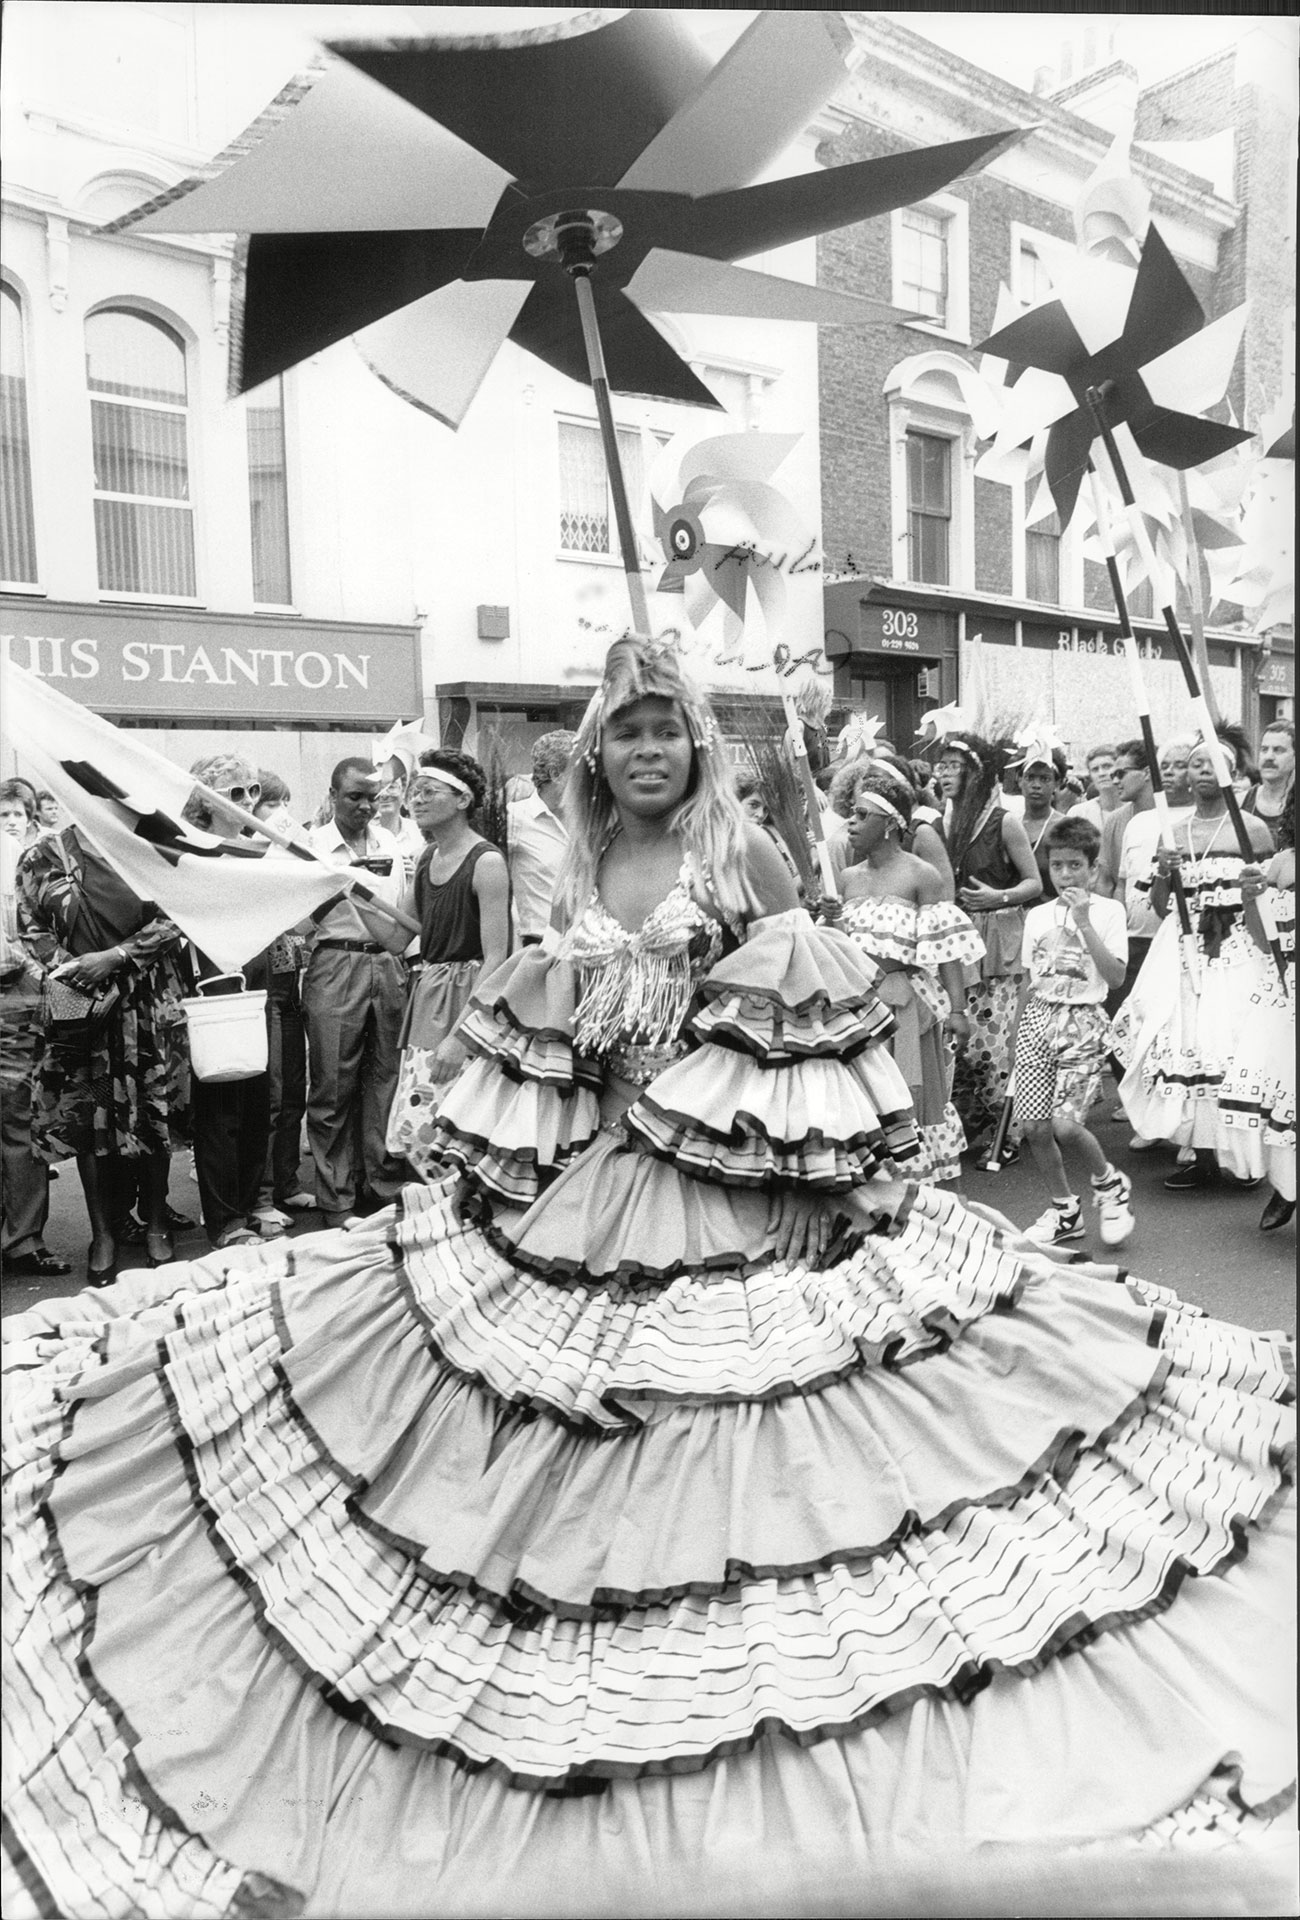 The Most Joyous Photographs Of Notting Hill Carnival Through The Years